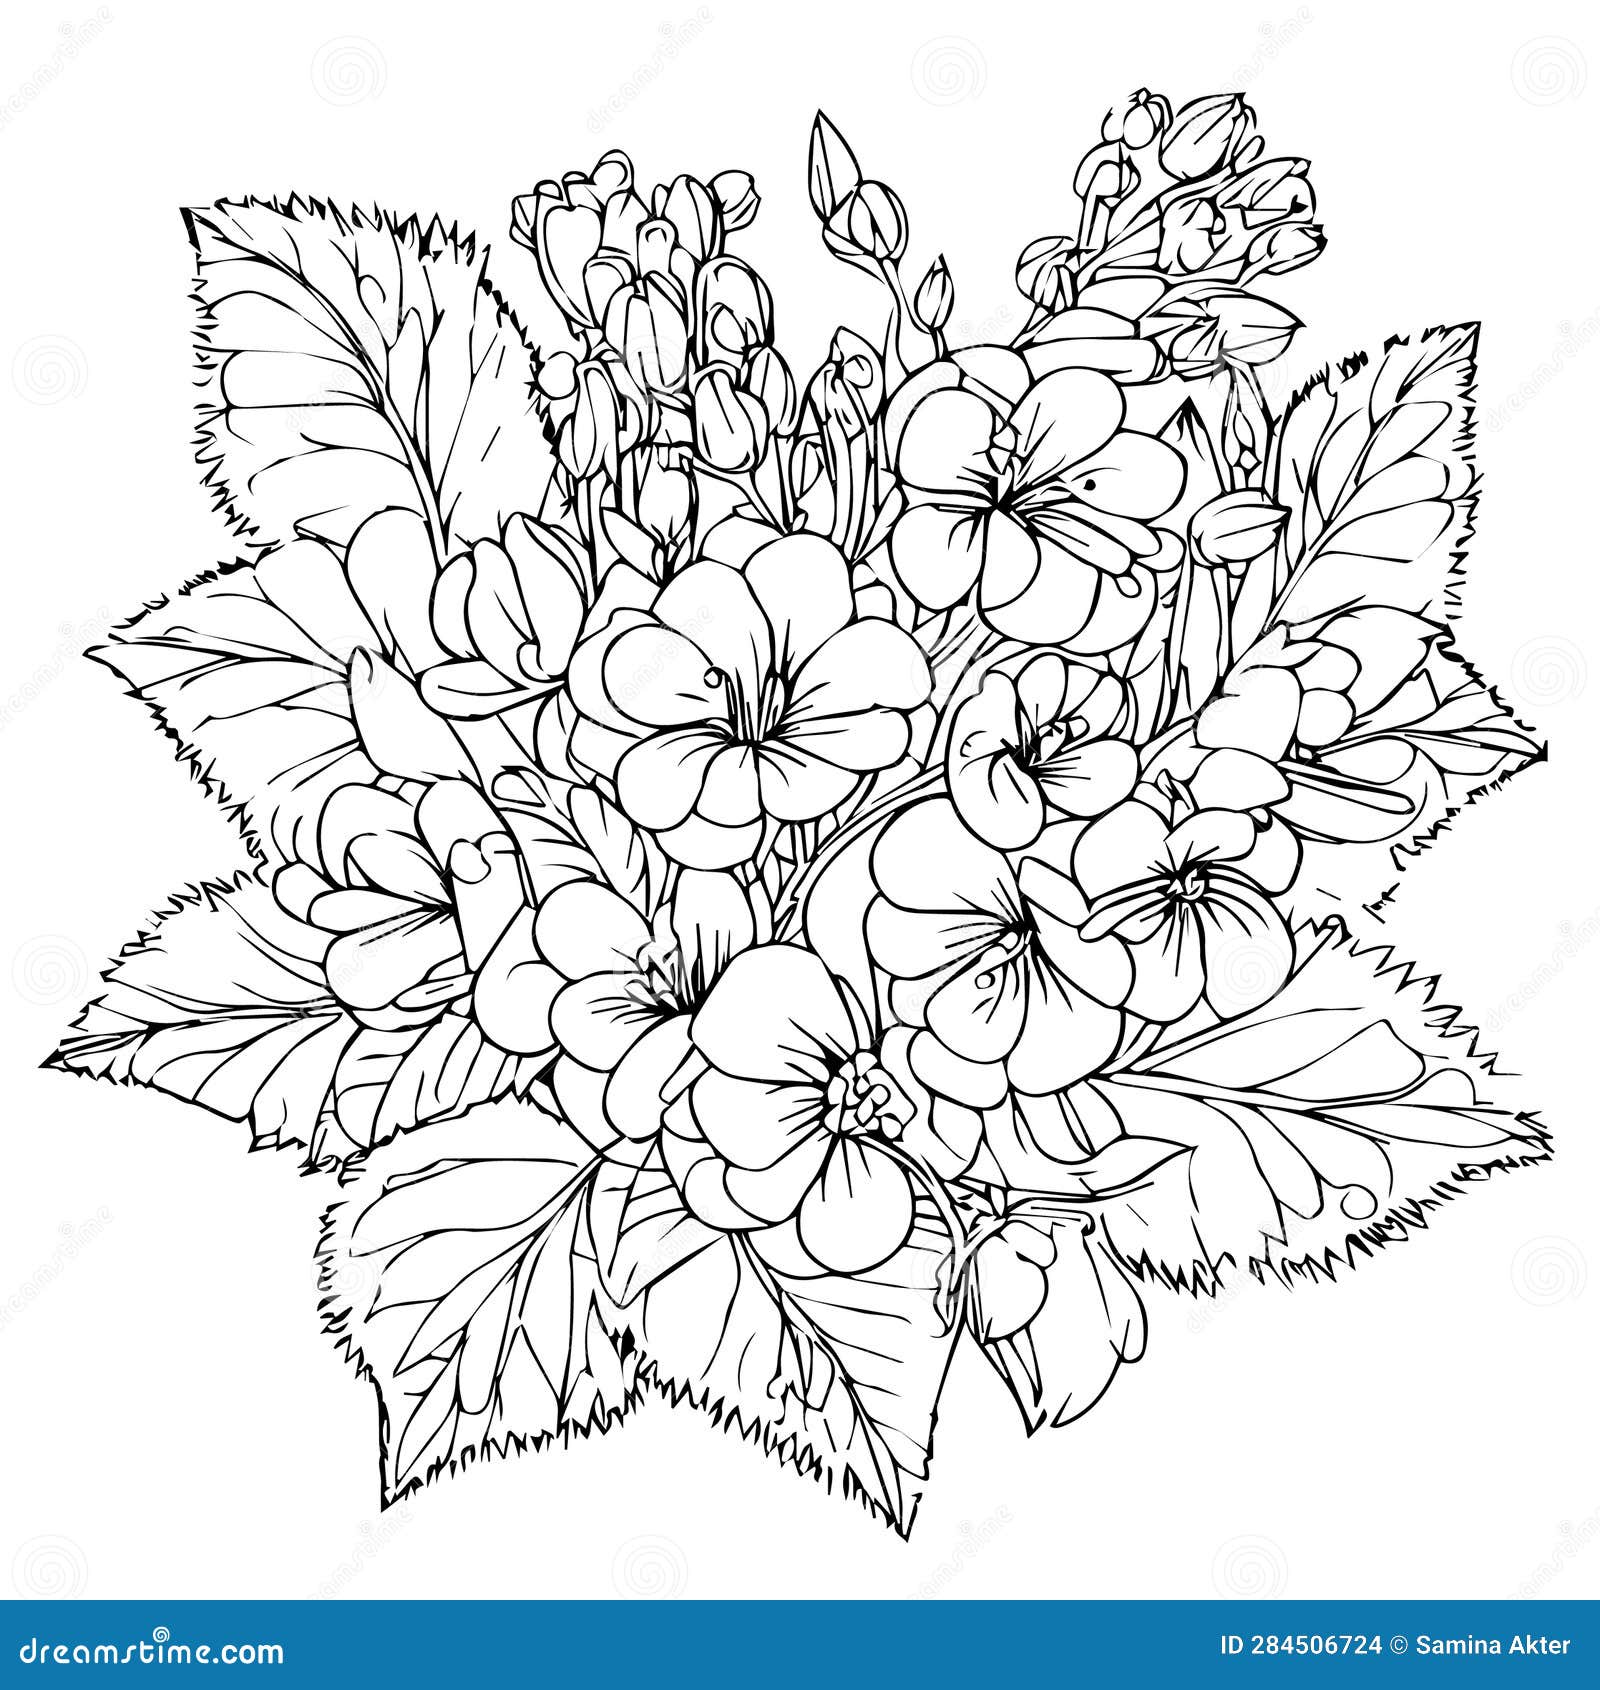 Violet birth flower line drawing stock illustrations â violet birth flower line drawing stock illustrations vectors clipart